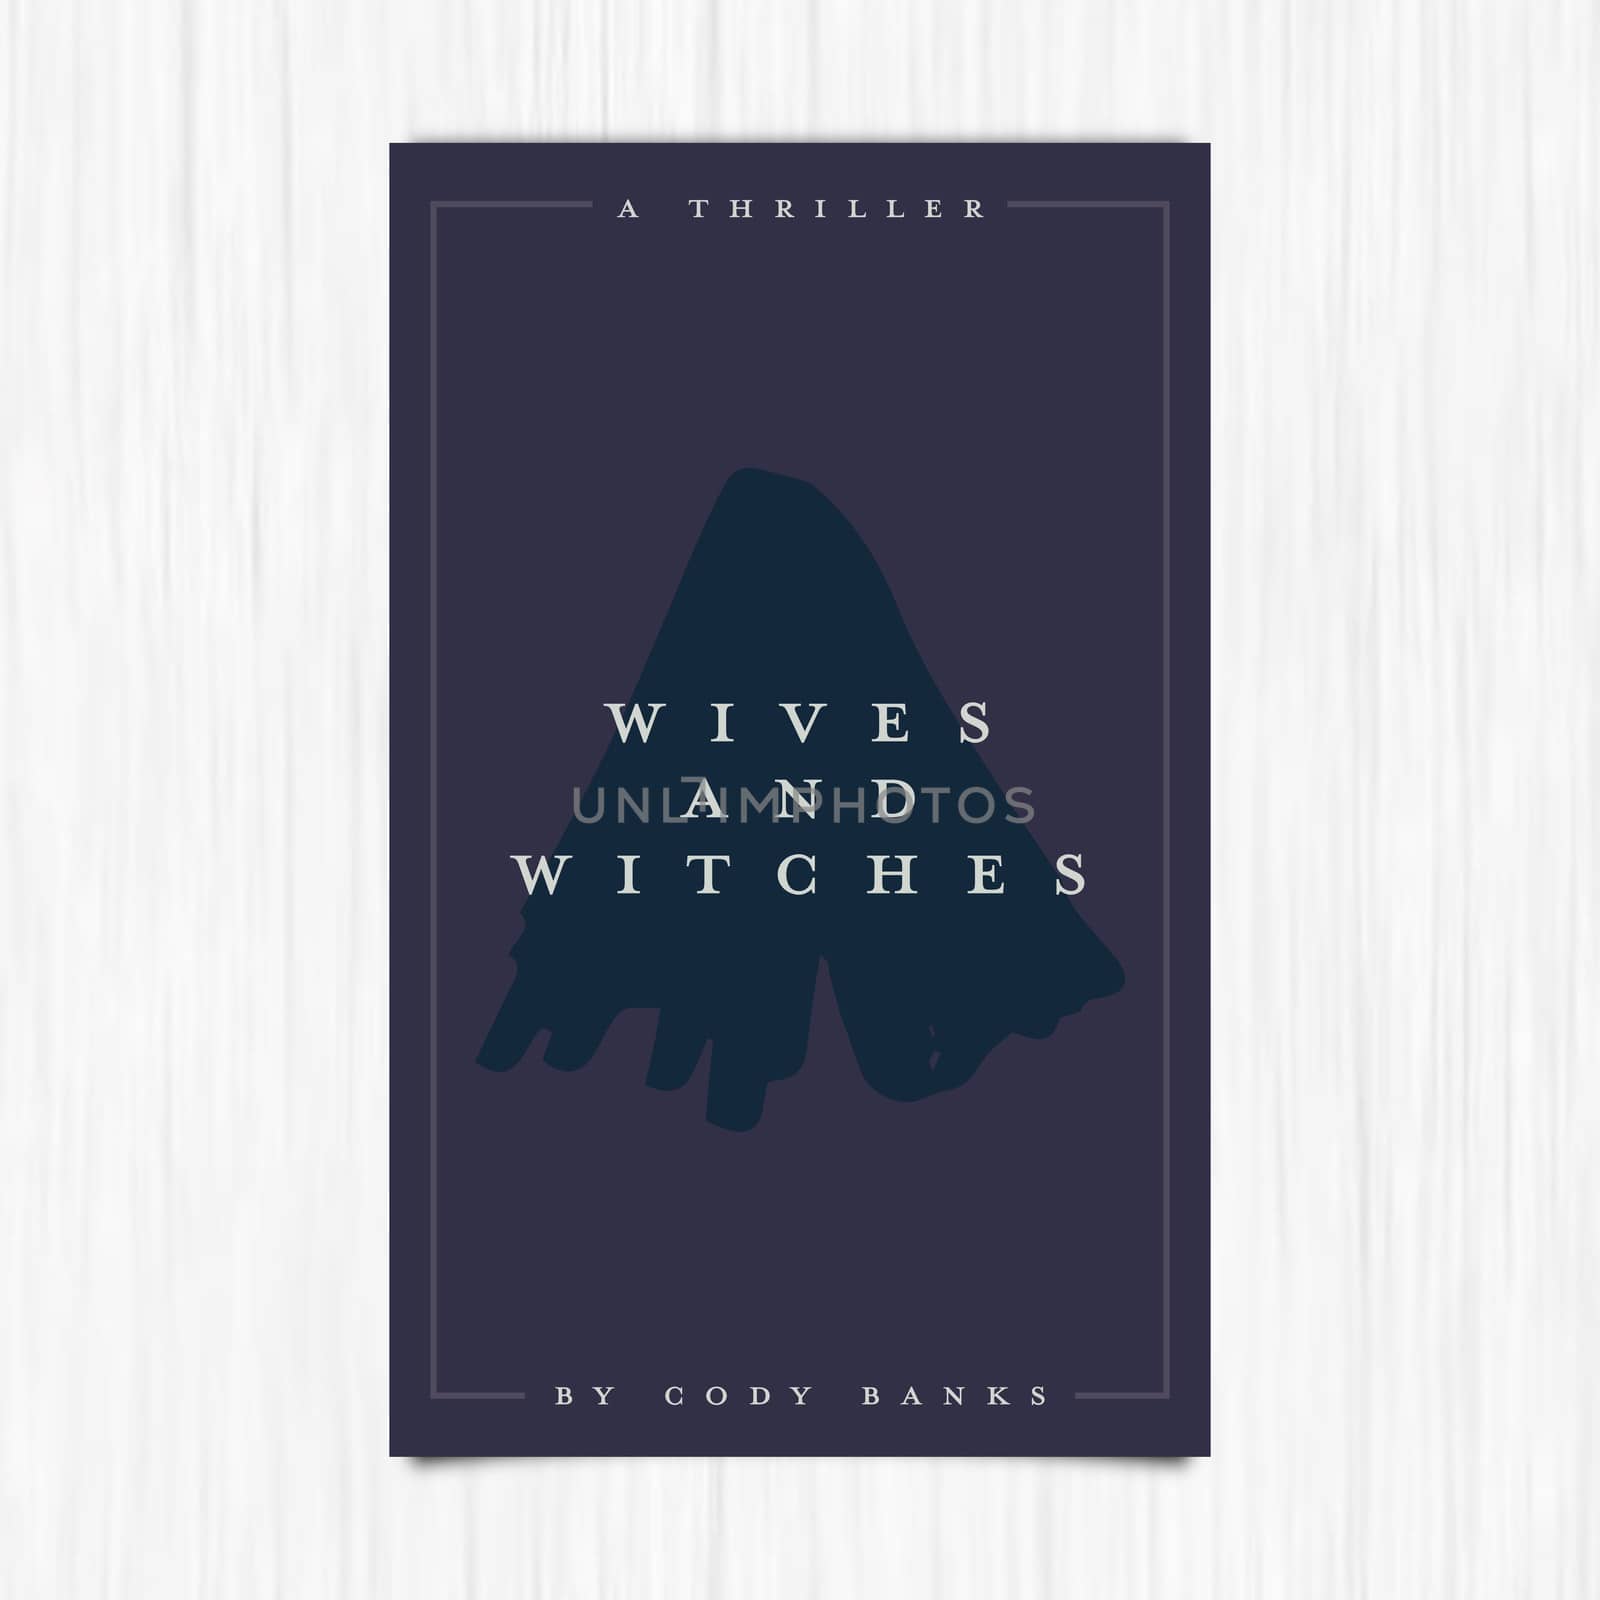 Vector of novel cover with wives and witches text by Wavebreakmedia